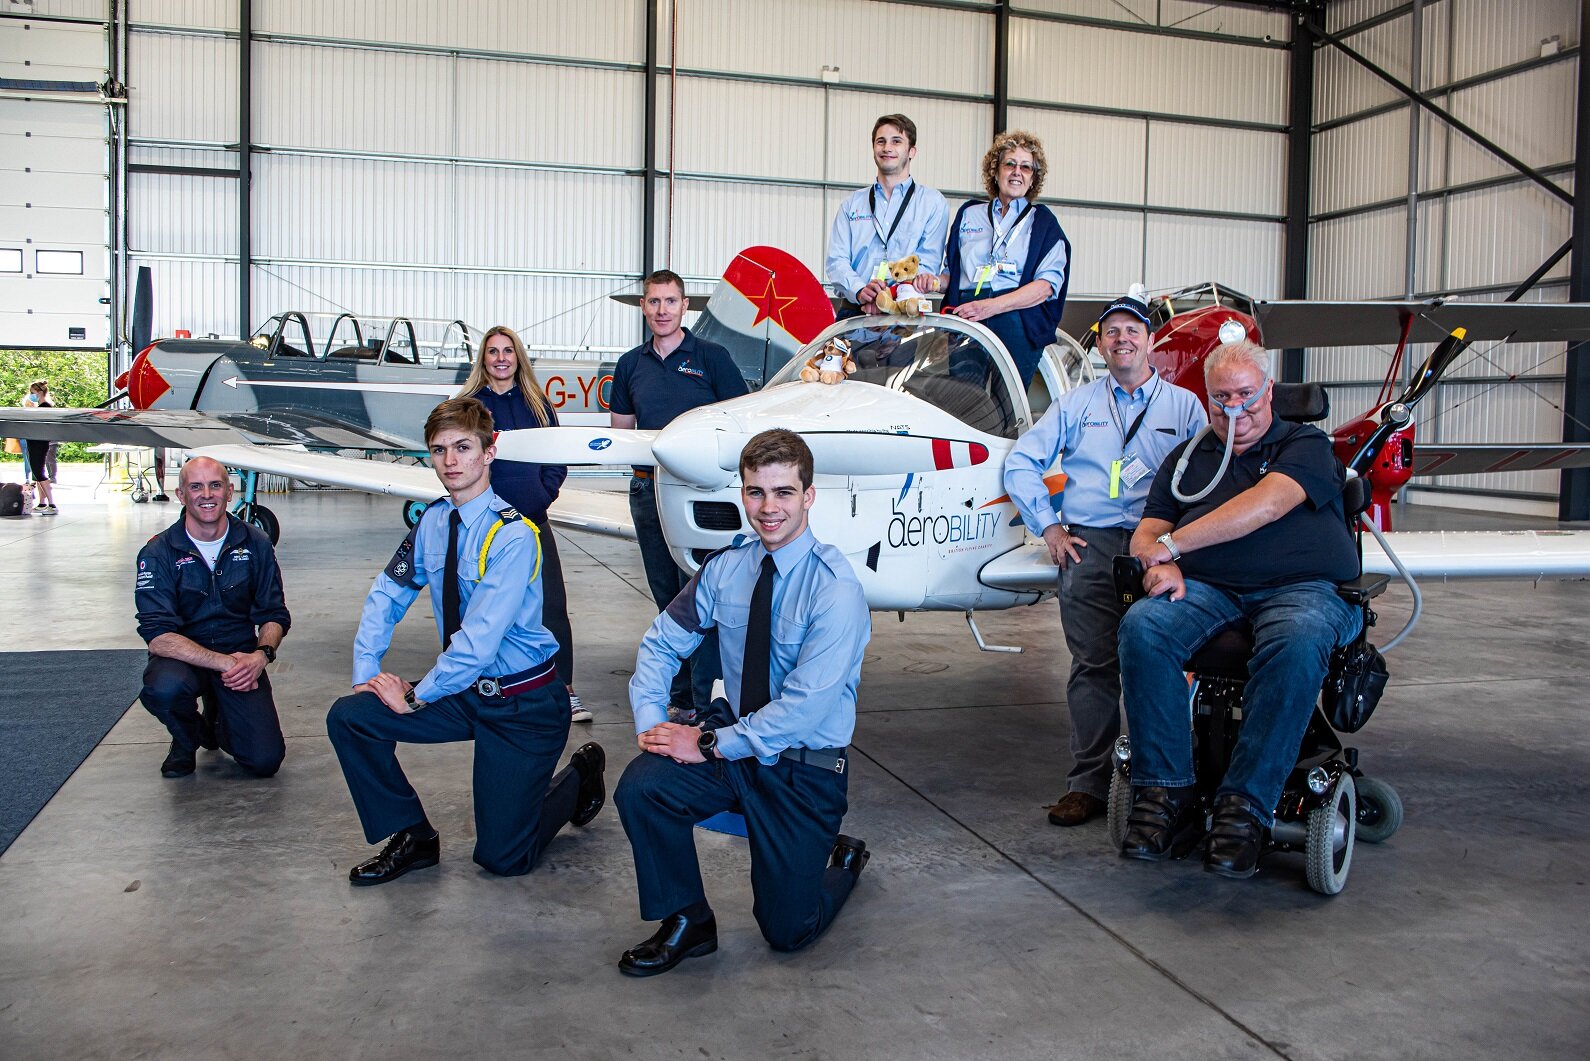 Mike_Miller-Smith_CEO_Aerobility_and_team_at_The_Armchair_Airshow.jpg